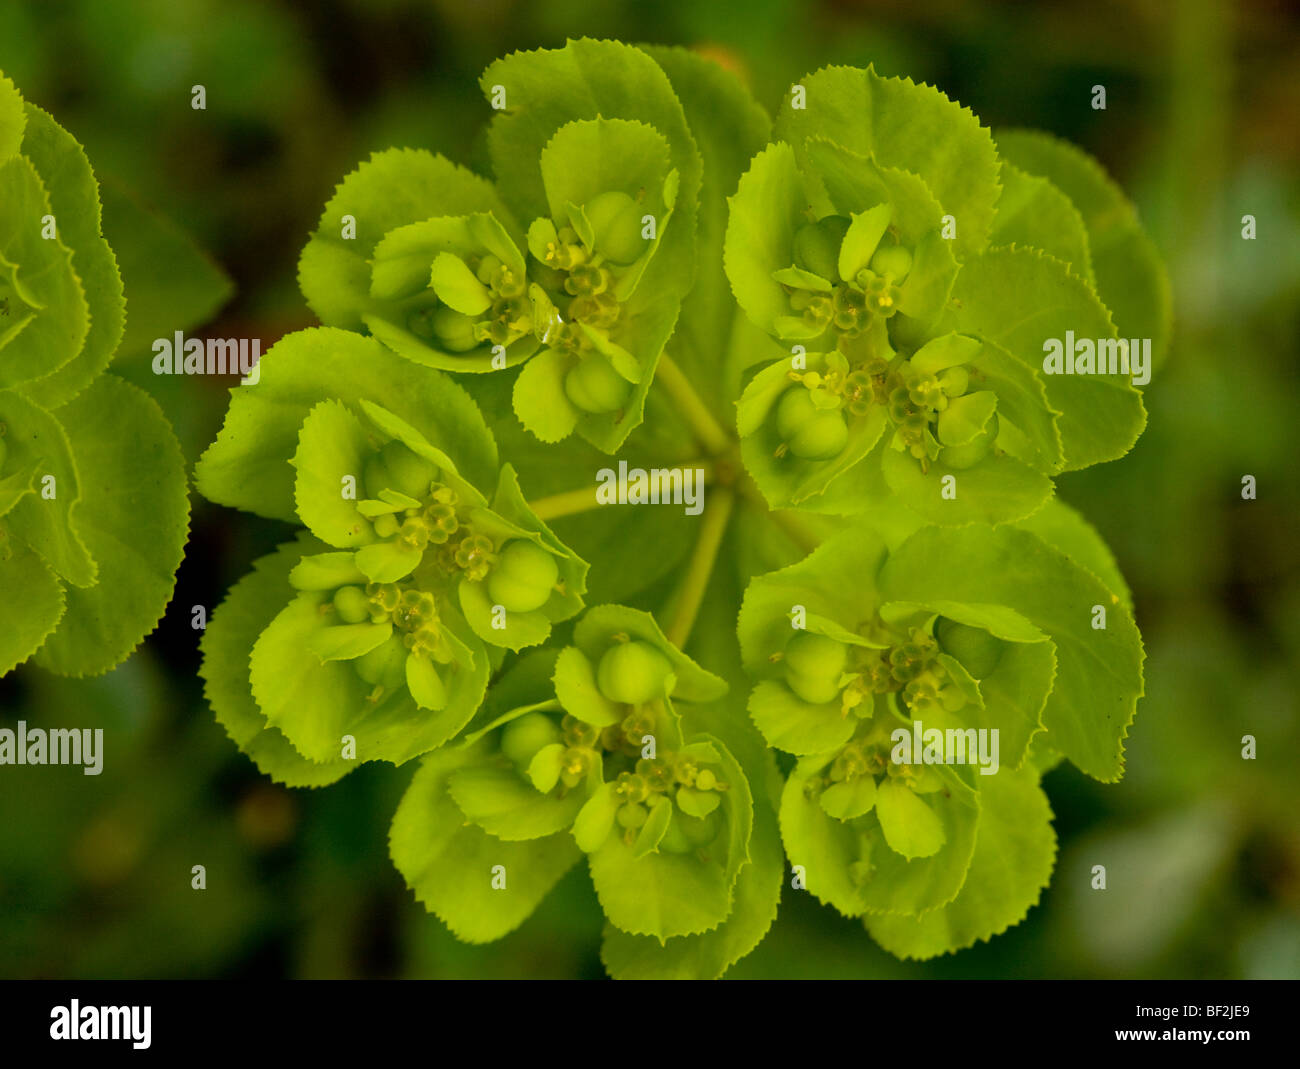 Sun spurge Euphorbia helioscopia, close up of umbel and flowers. Widespread weed. Stock Photo